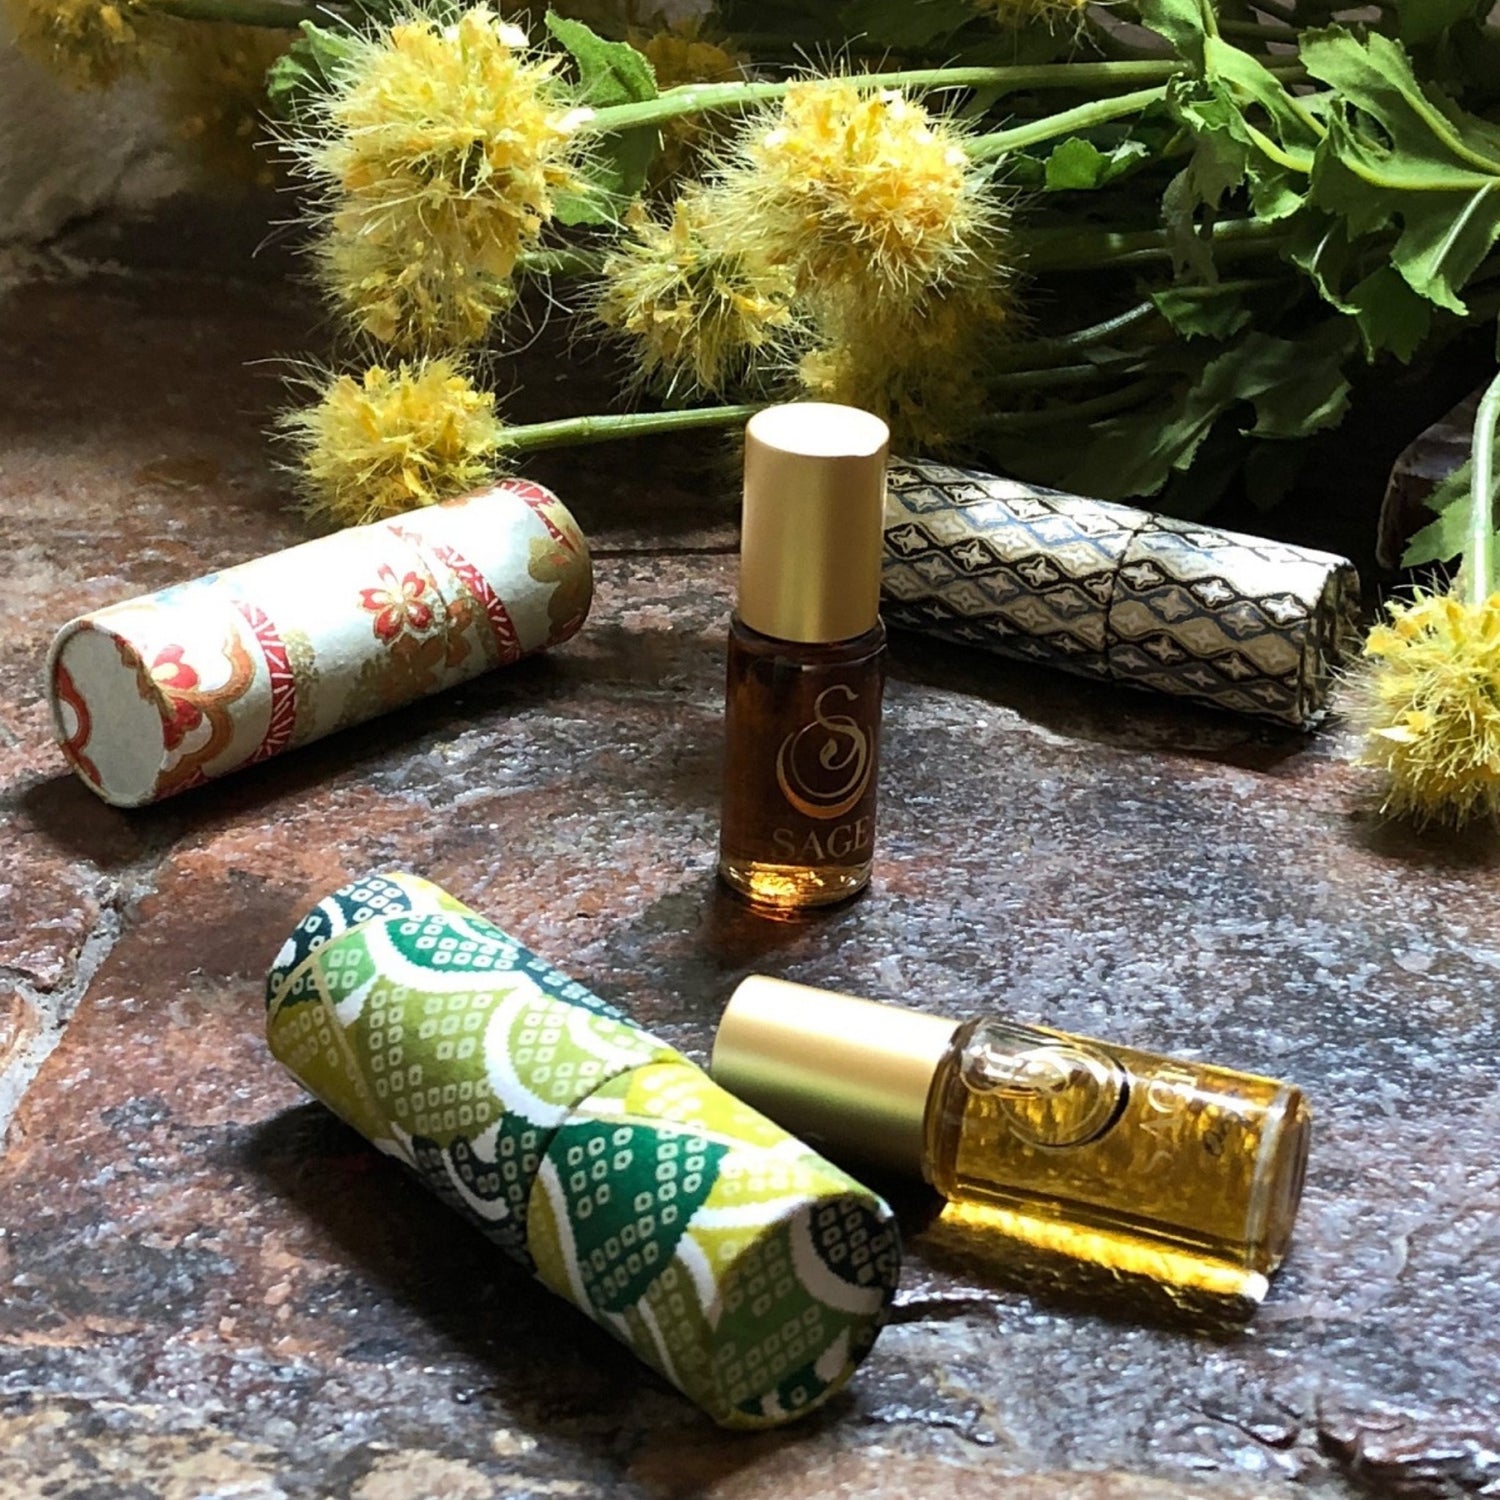 Peridot Gemstone Perfume Oil Roll-On by Sage - The Sage Lifestyle